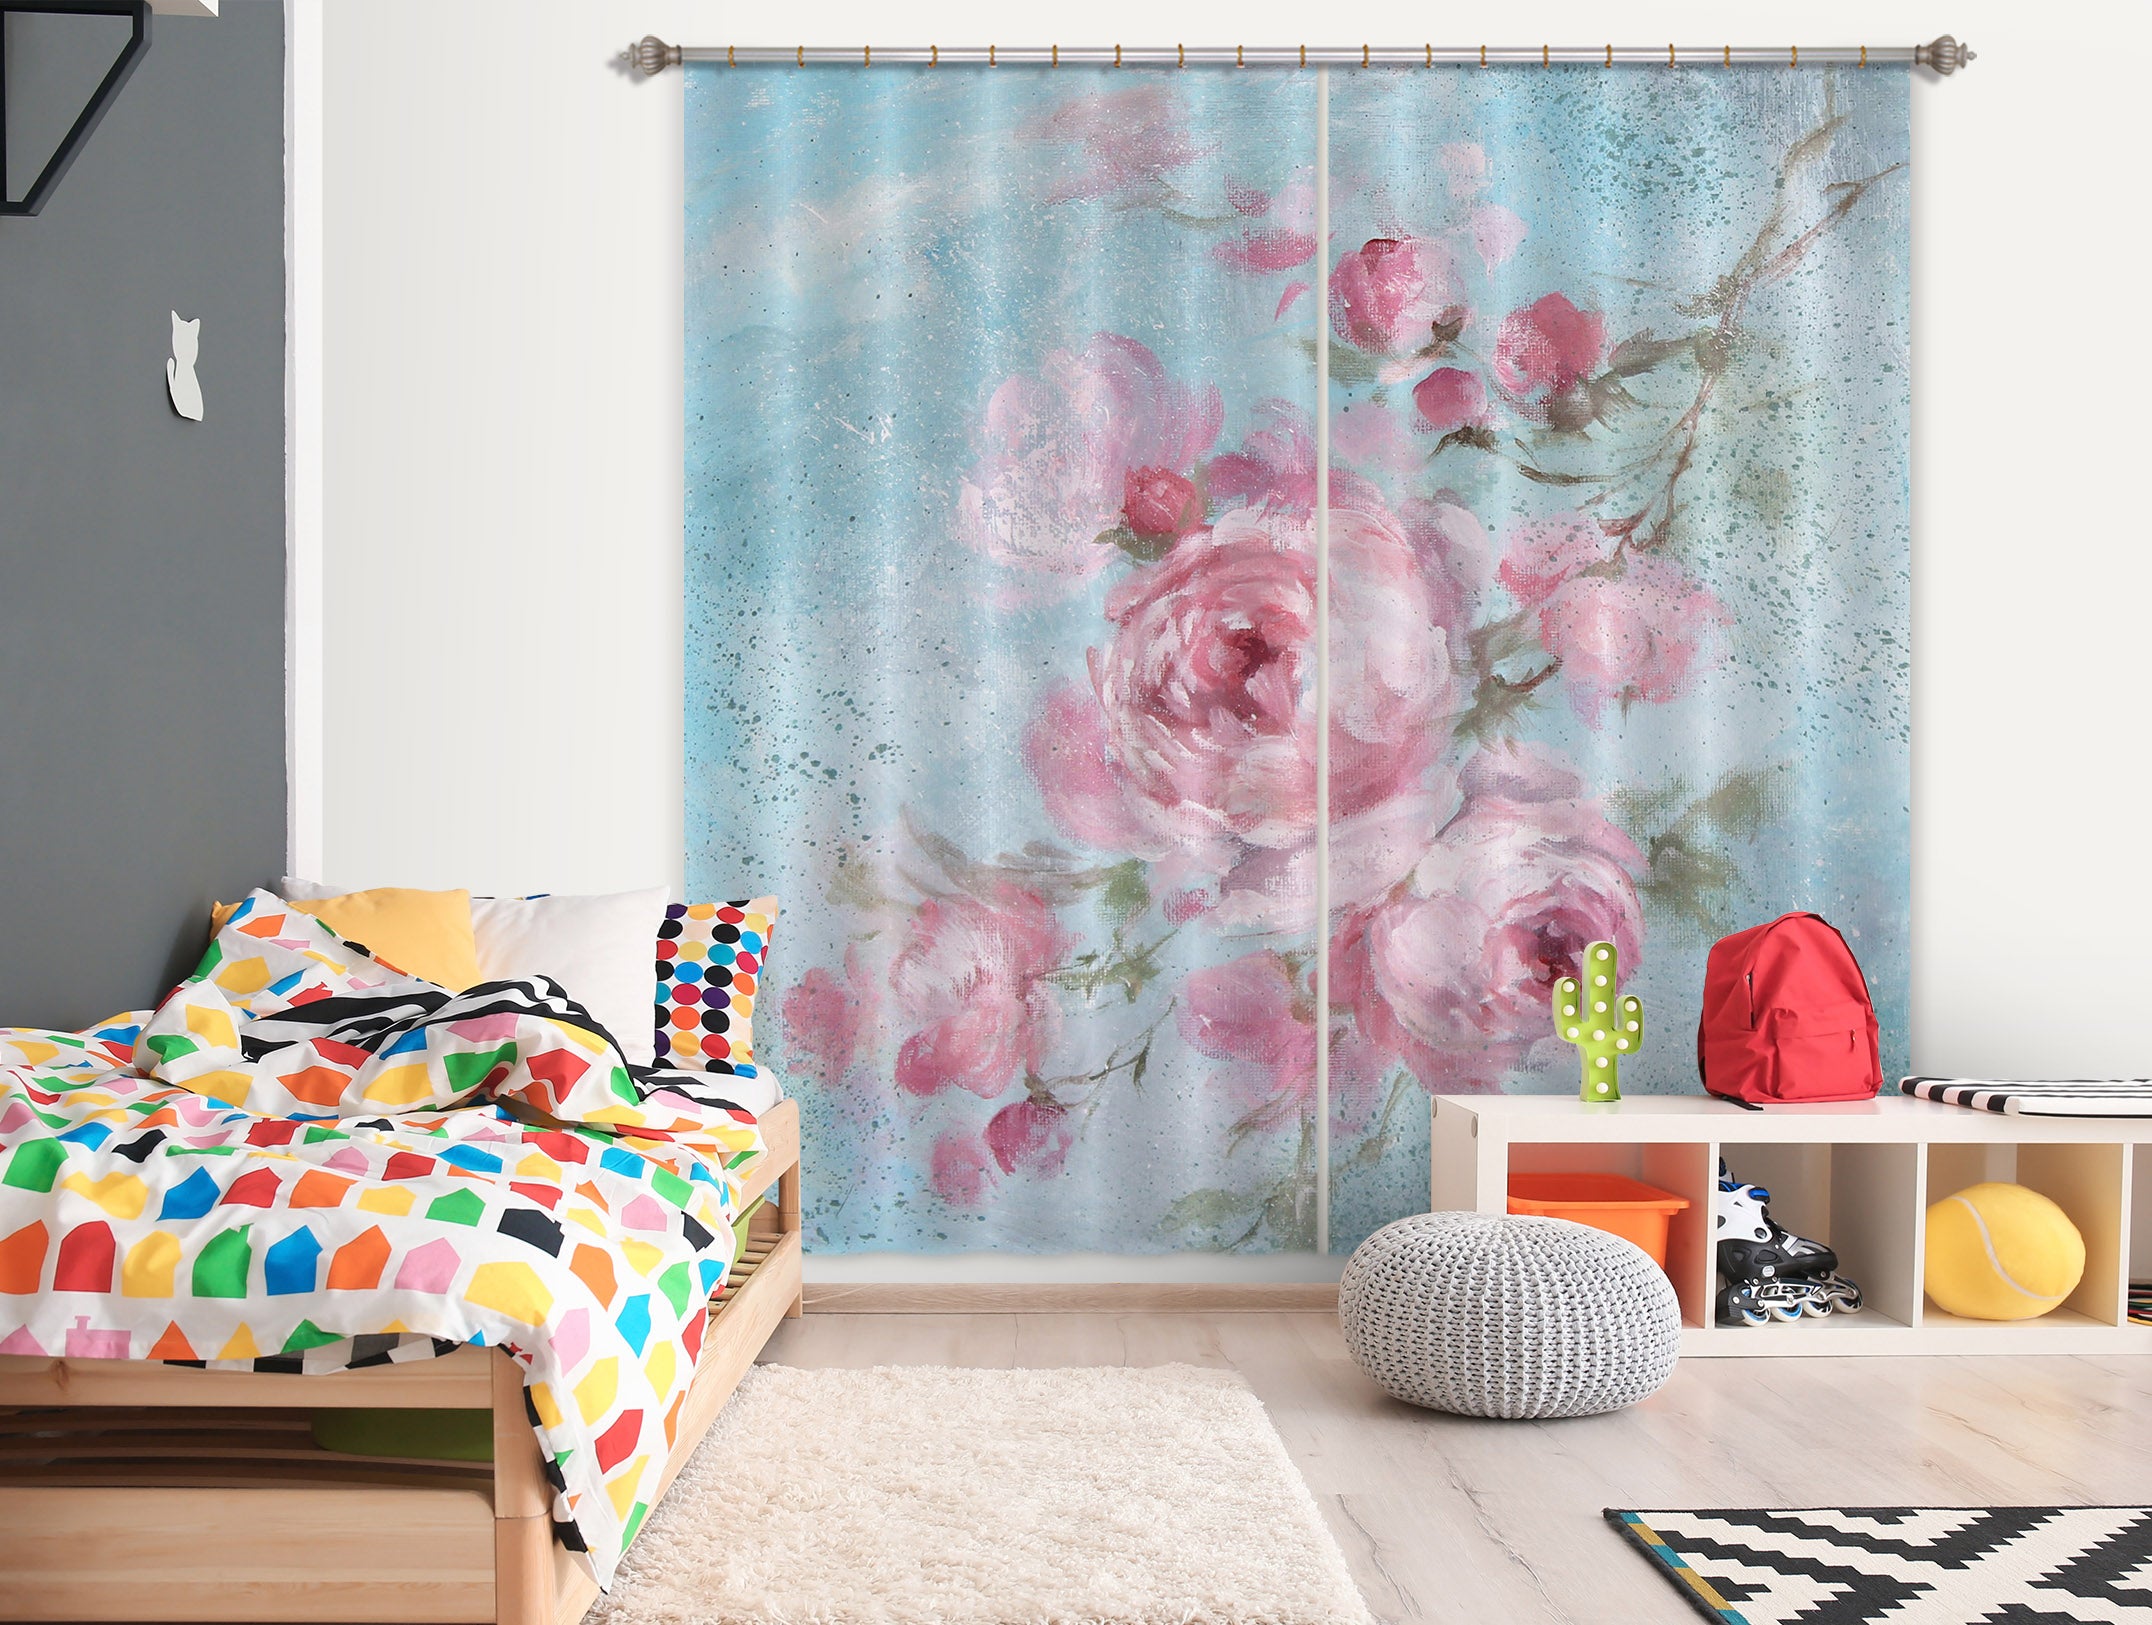 3D Pink Rose 2210 Debi Coules Curtain Curtains Drapes